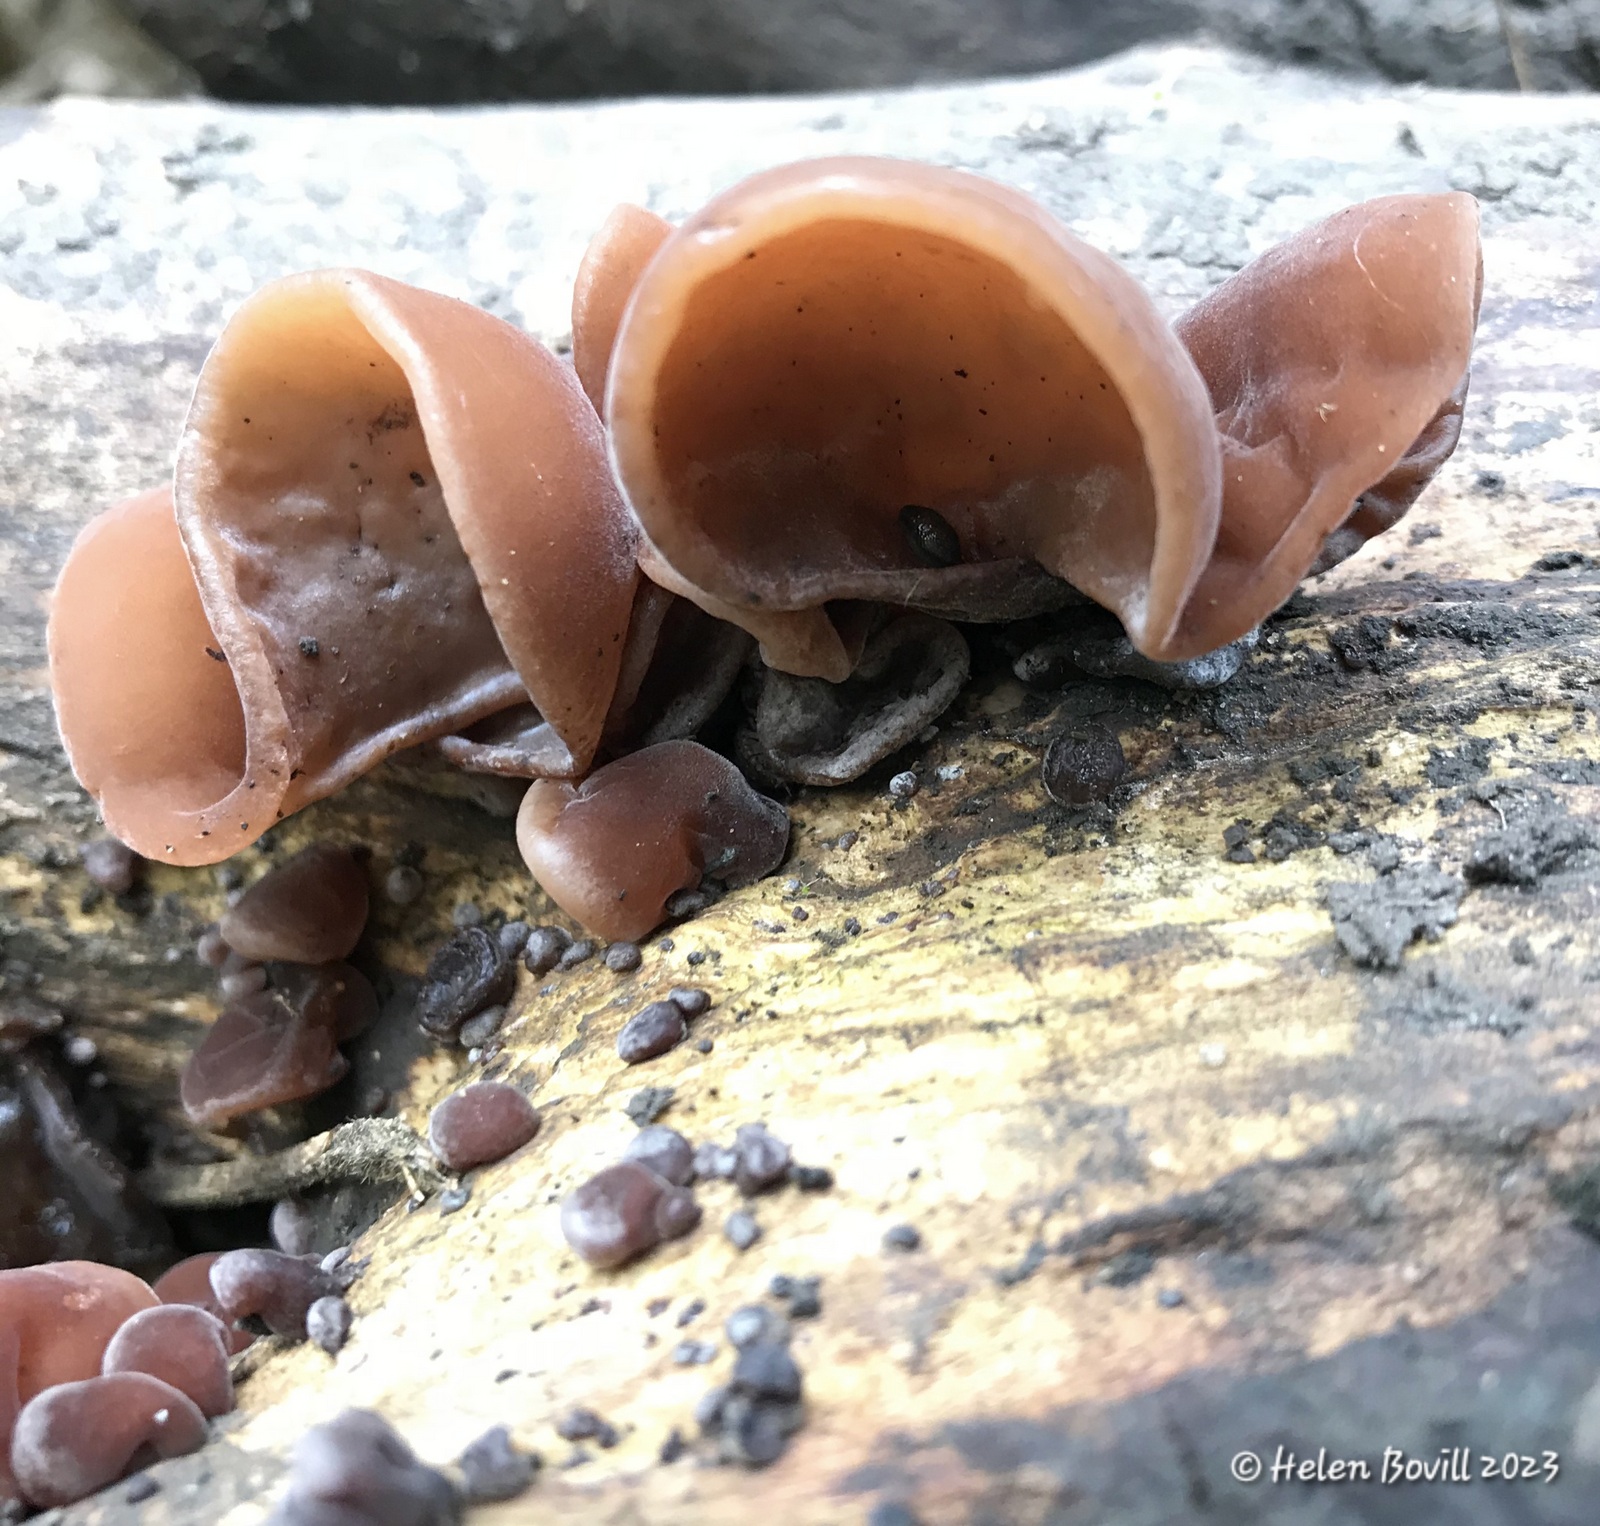 A Jelly fungus growing on a fallen branch - food for the cemetery wildlife